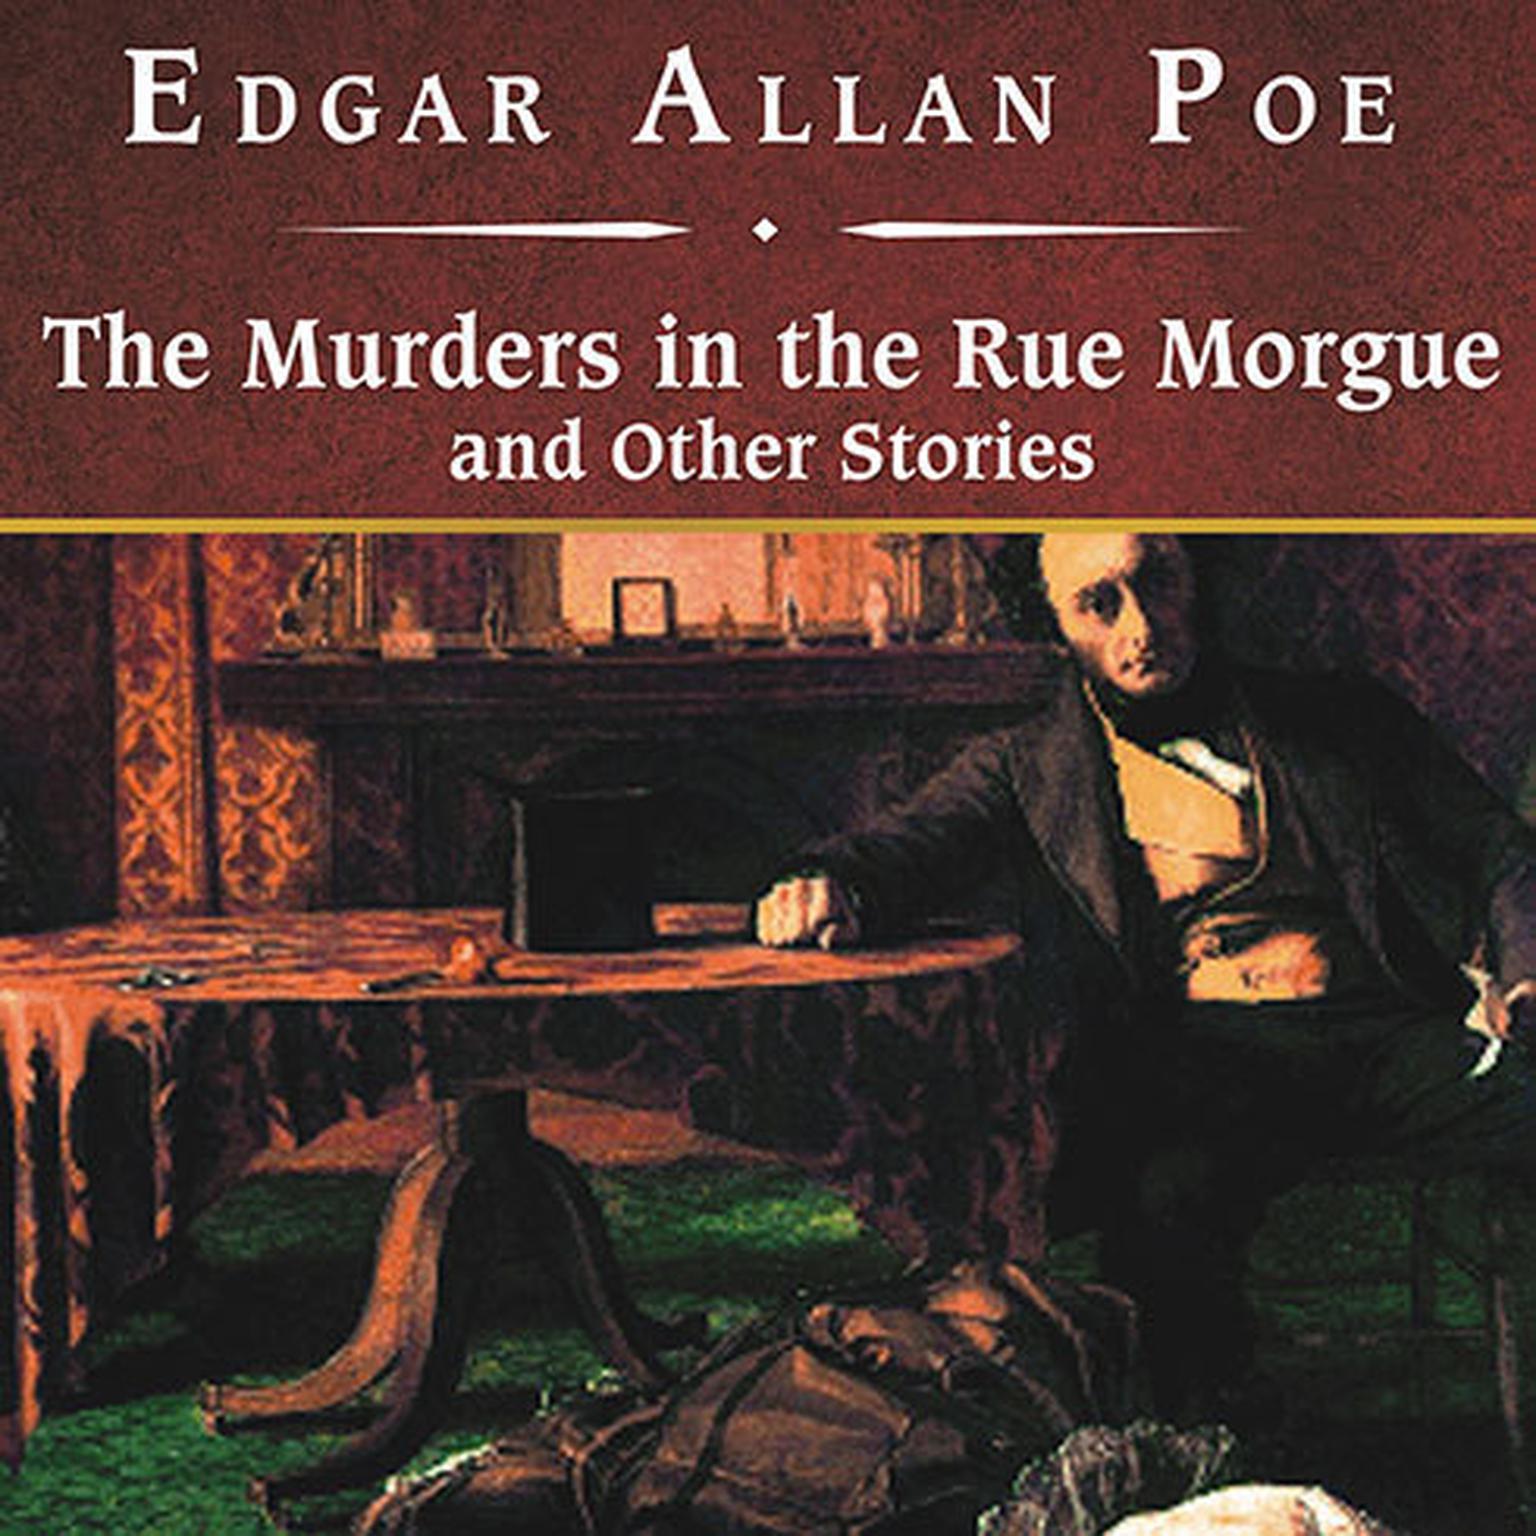 The Murders in the Rue Morgue and Other Stories, with eBook Audiobook, by Edgar Allan Poe